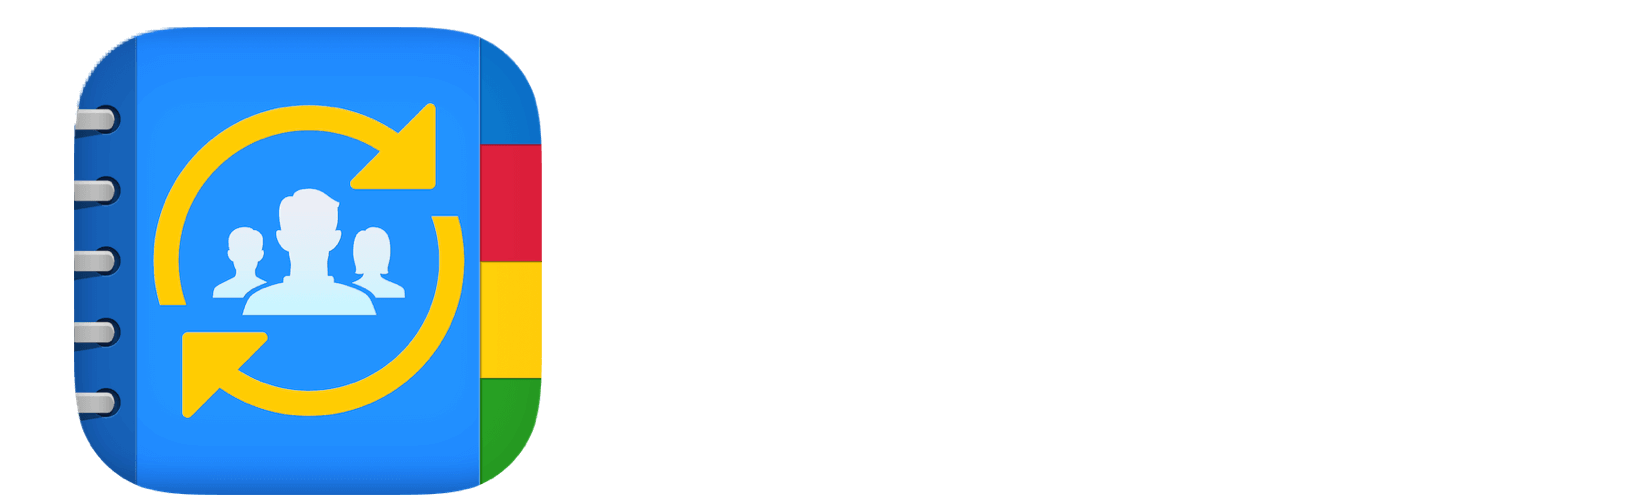 Contact Mover & Account Sync